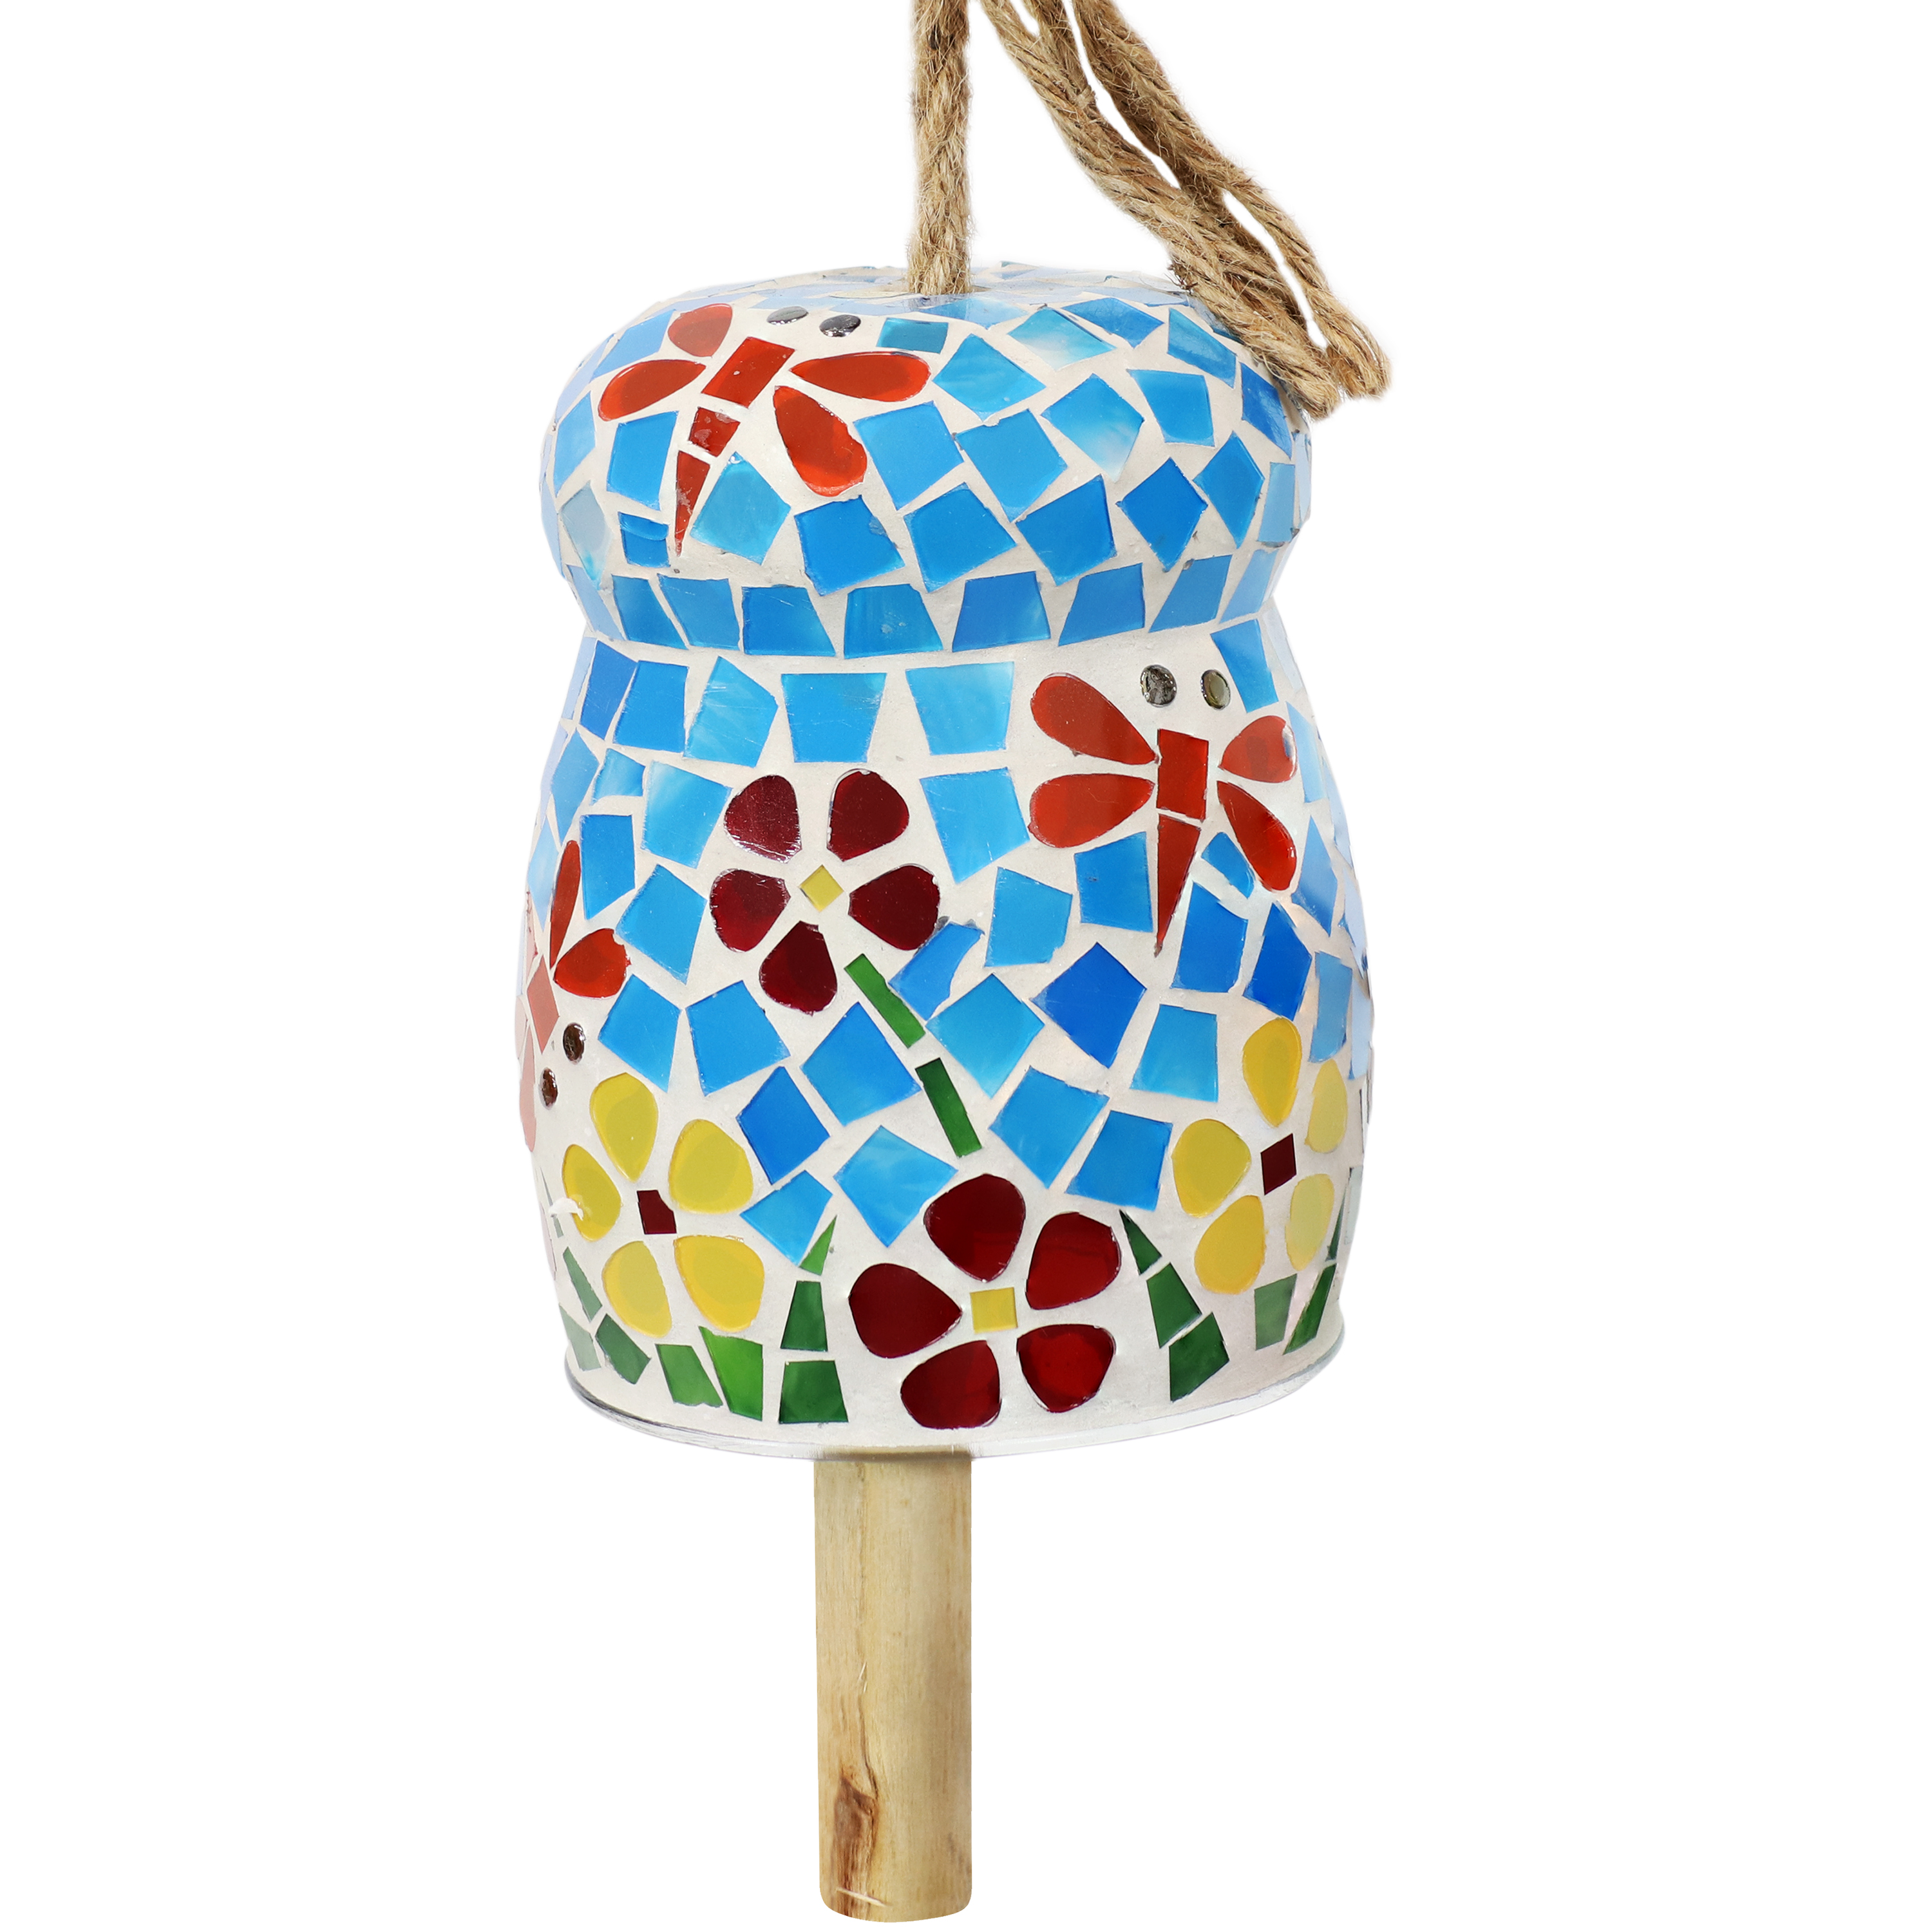 Spring Flowers Mosaic Glass Wind Bell Chime - 7 in